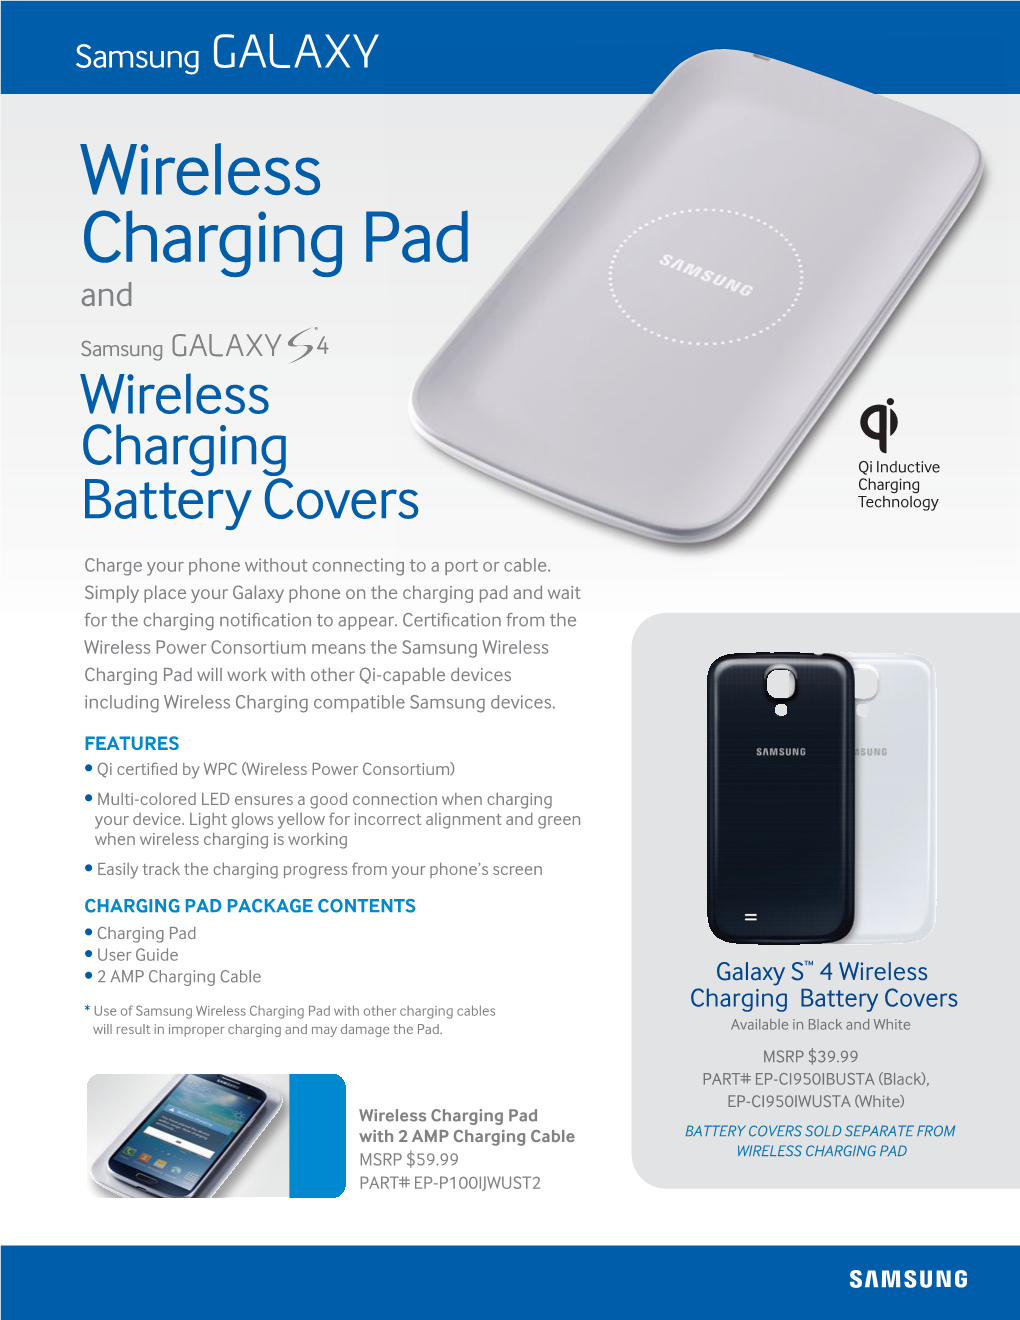 Wireless Charging Pad and Wireless